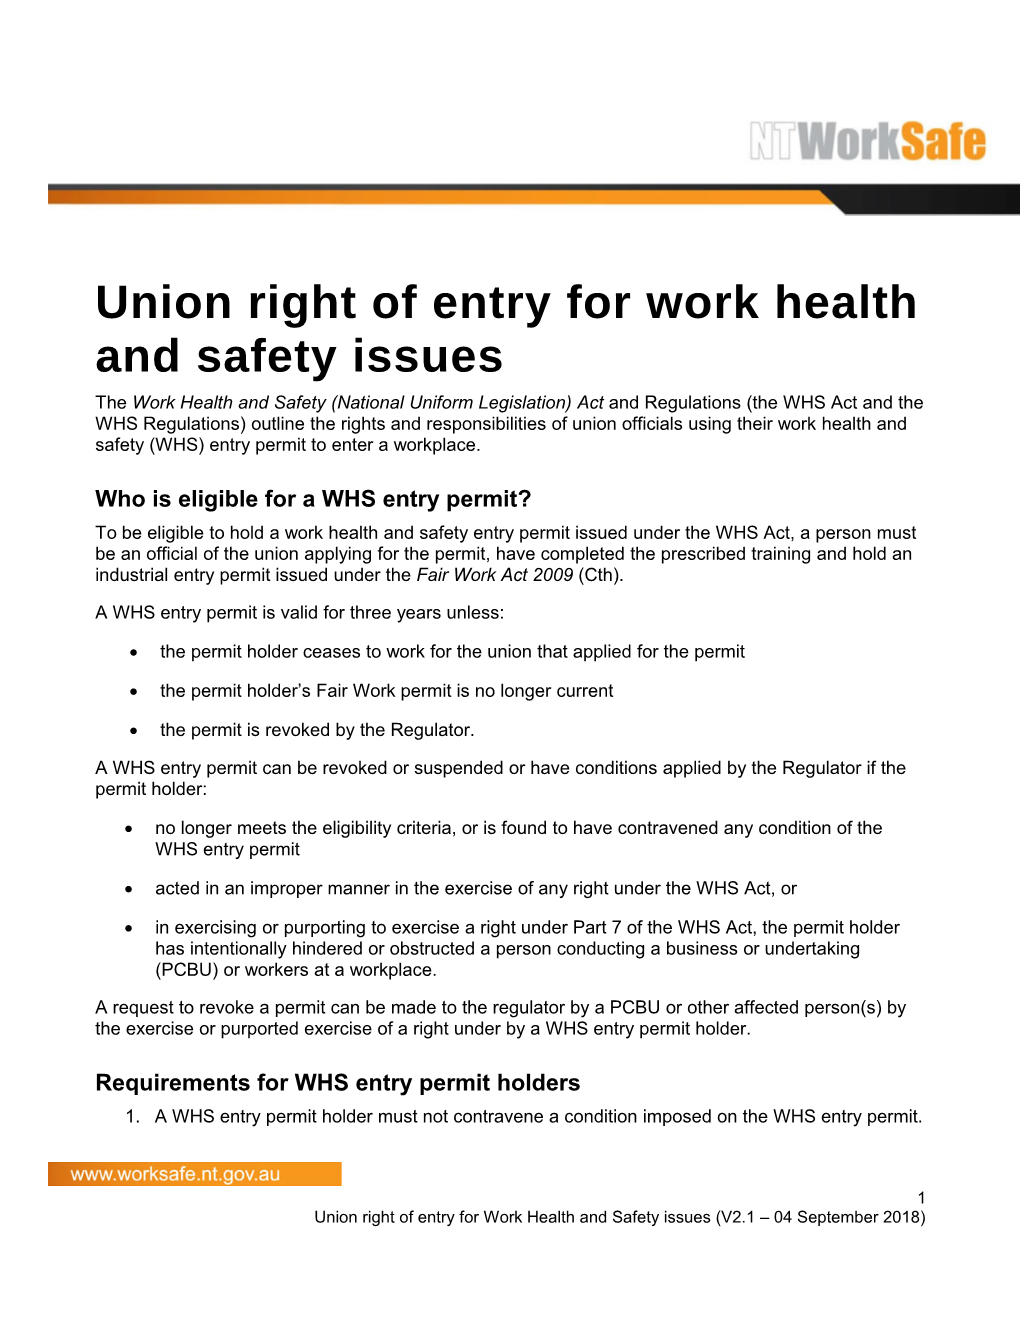 Union Right of Entry for Work Health and Safety Issues